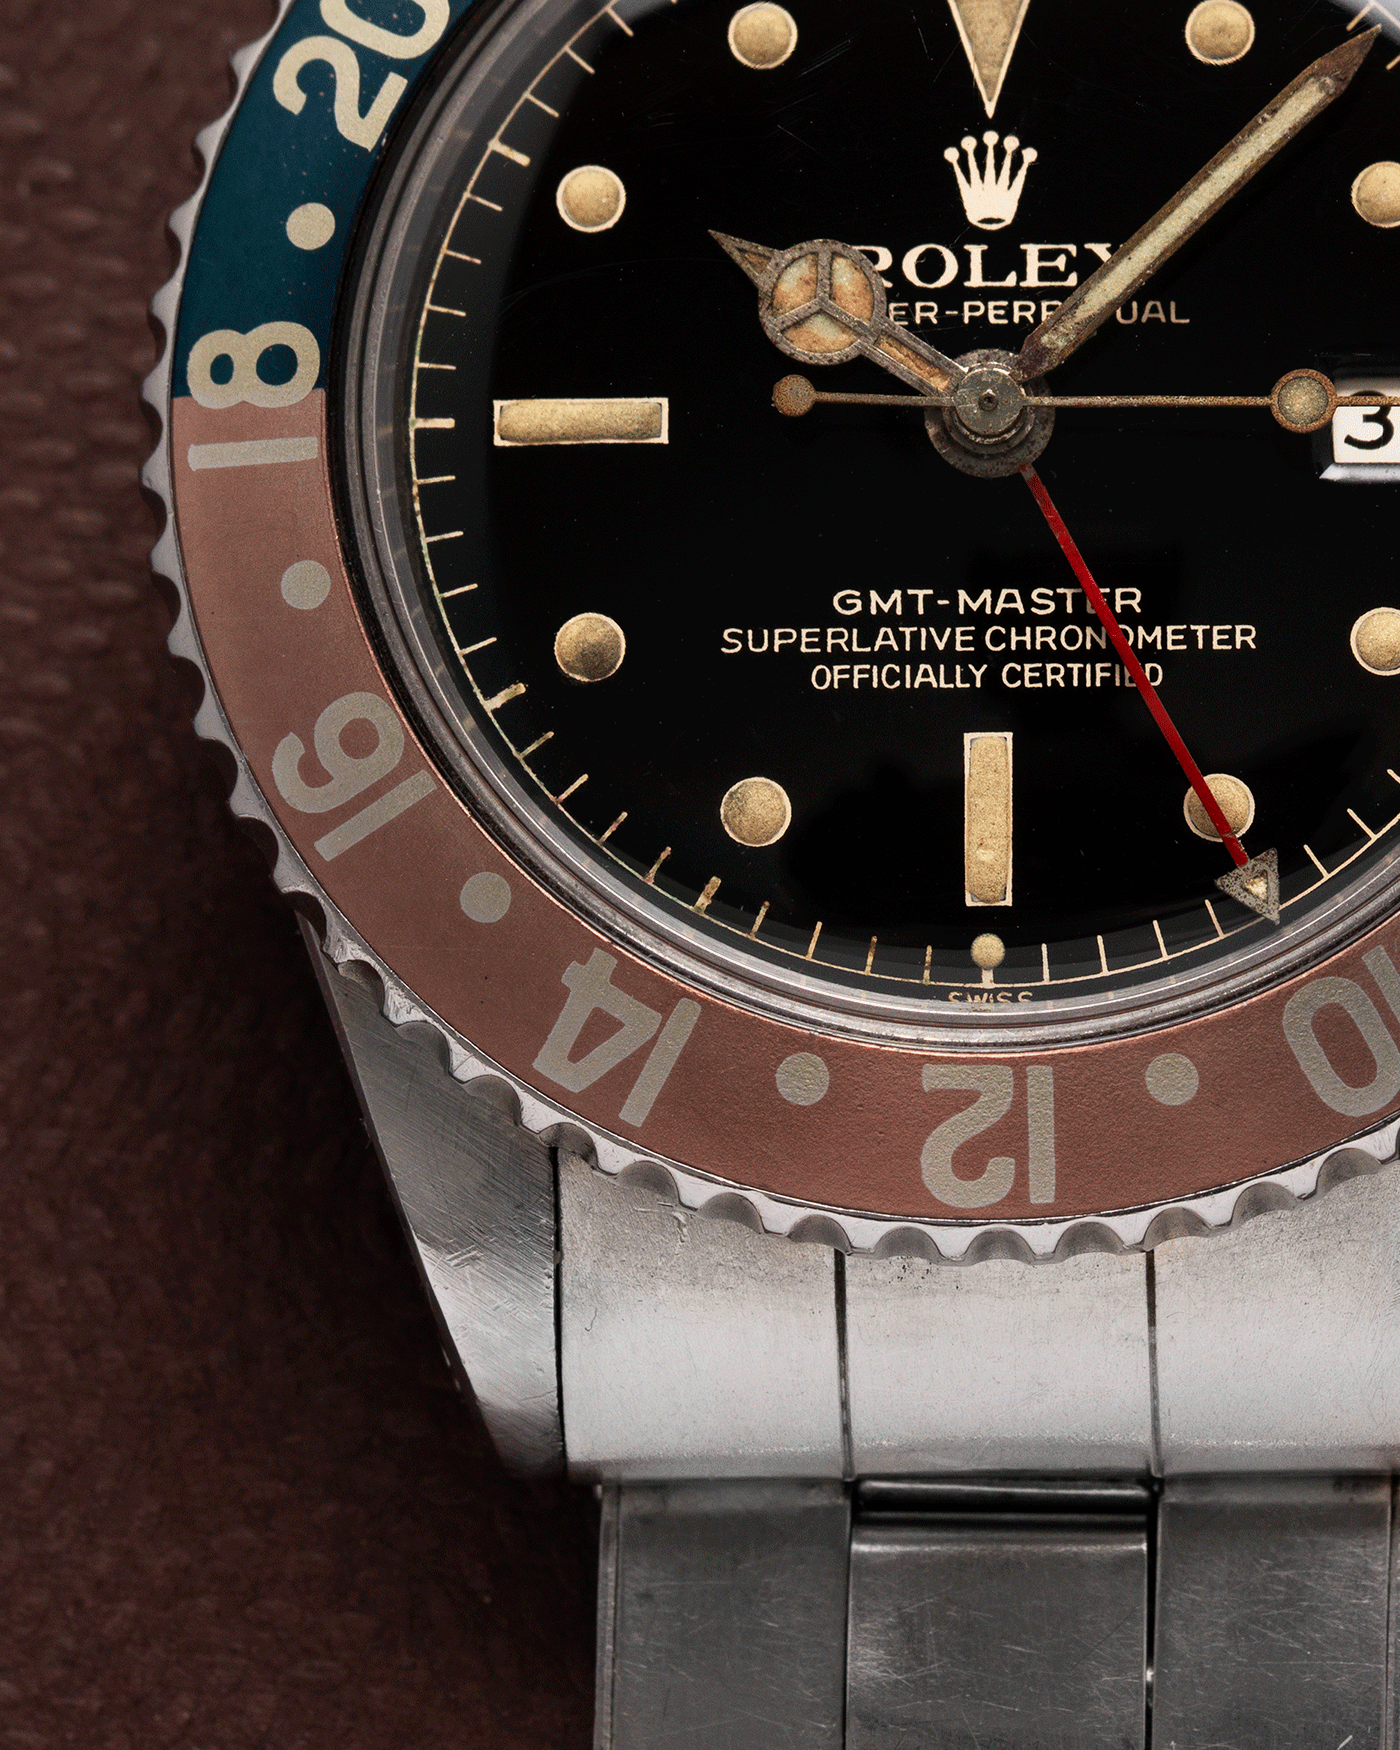 Brand: Rolex Year: 1963 Model: GMT-Master Reference Number: 1675 Serial Number: 87XXXX Material: Stainless Steel Movement: Cal. 1565 Case Diameter: 40mm Lug Width: 20mm Bracelet/Strap: Stainless Steel Rolex C&I Riveted Elastic Bracelet